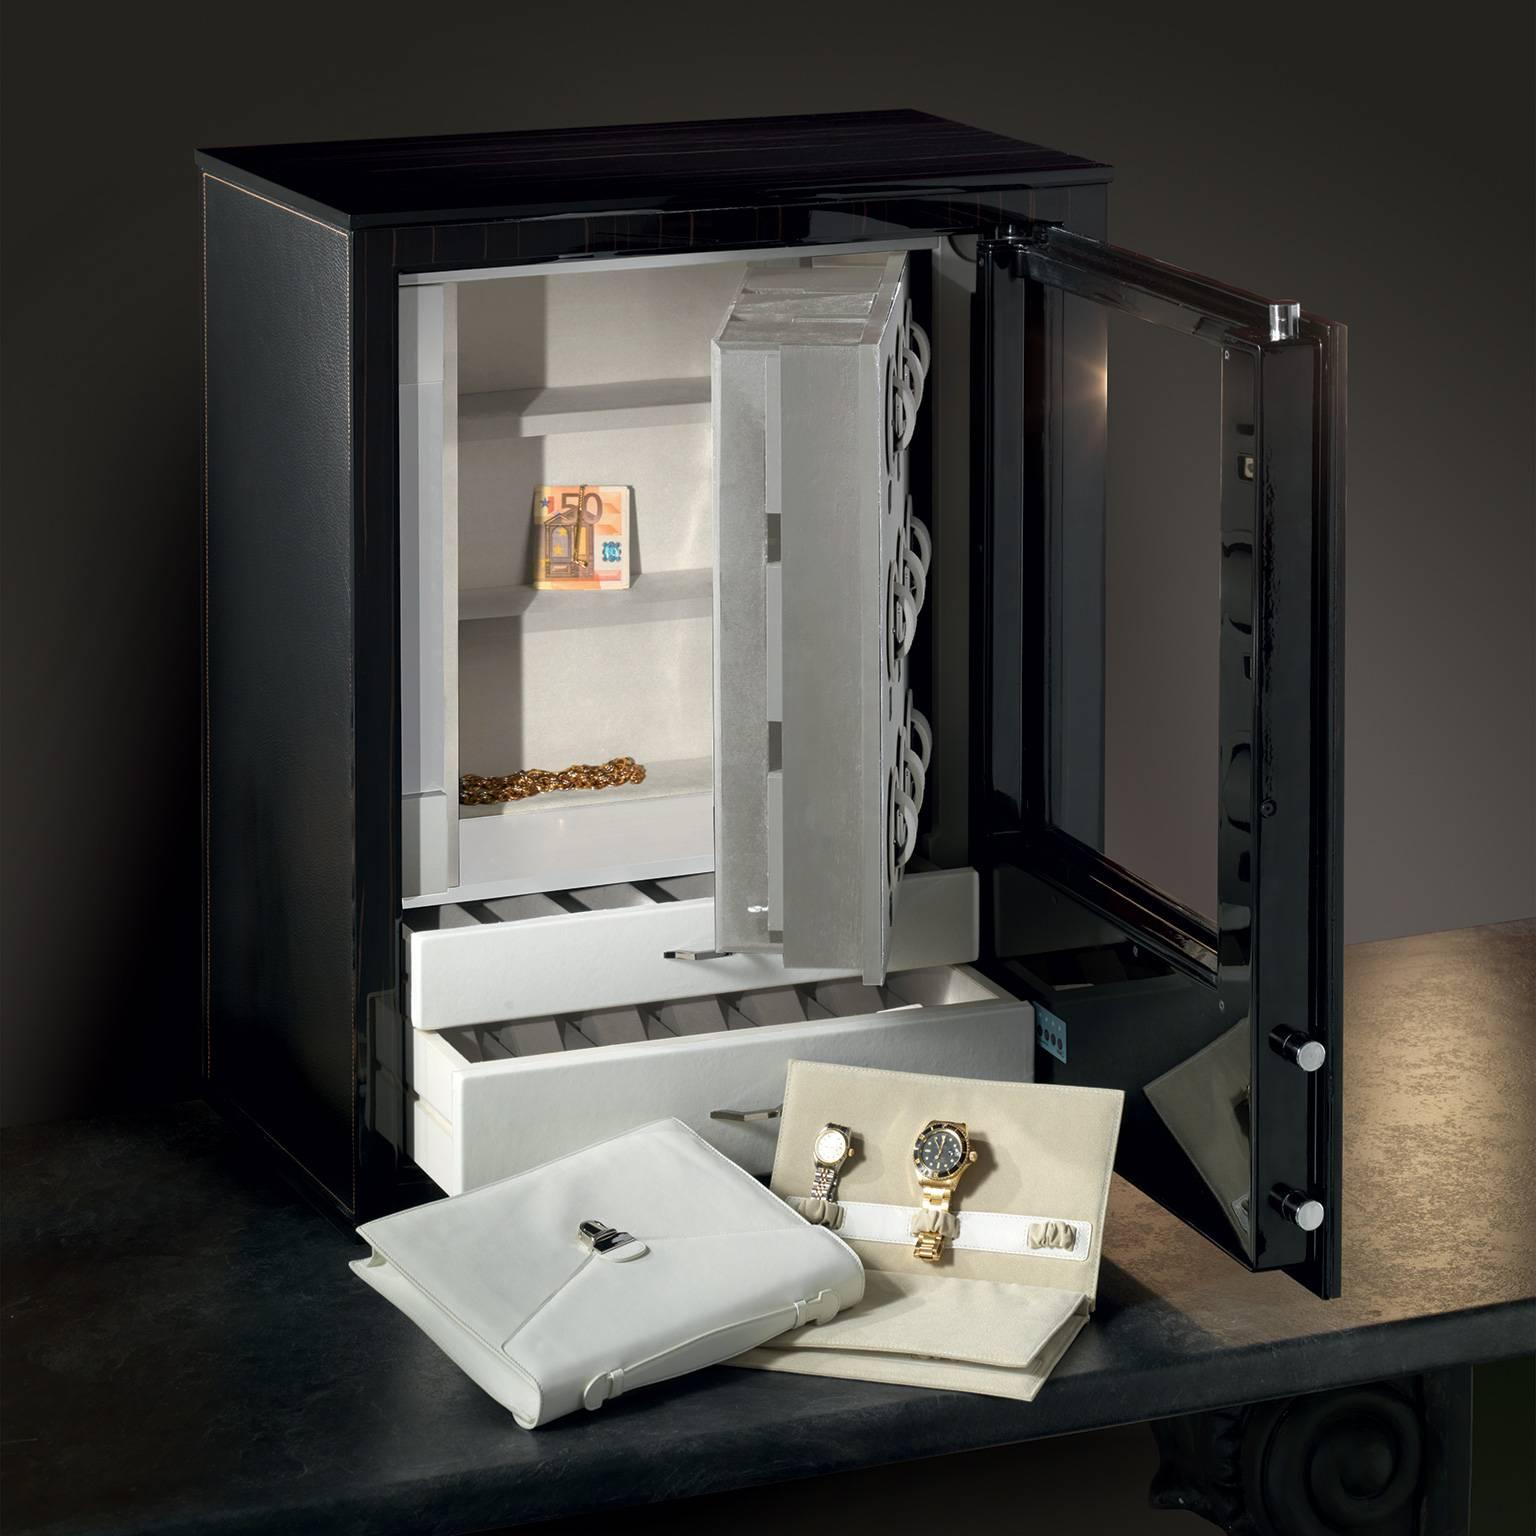 Il Forziere Delle Ore is an armoured chest safe in polished ebony with nine winders, bullet proof glass which is anchorable to the wall. Biometric opening device and emergency key system. Watch winders entirely made in Switzerland. Secret